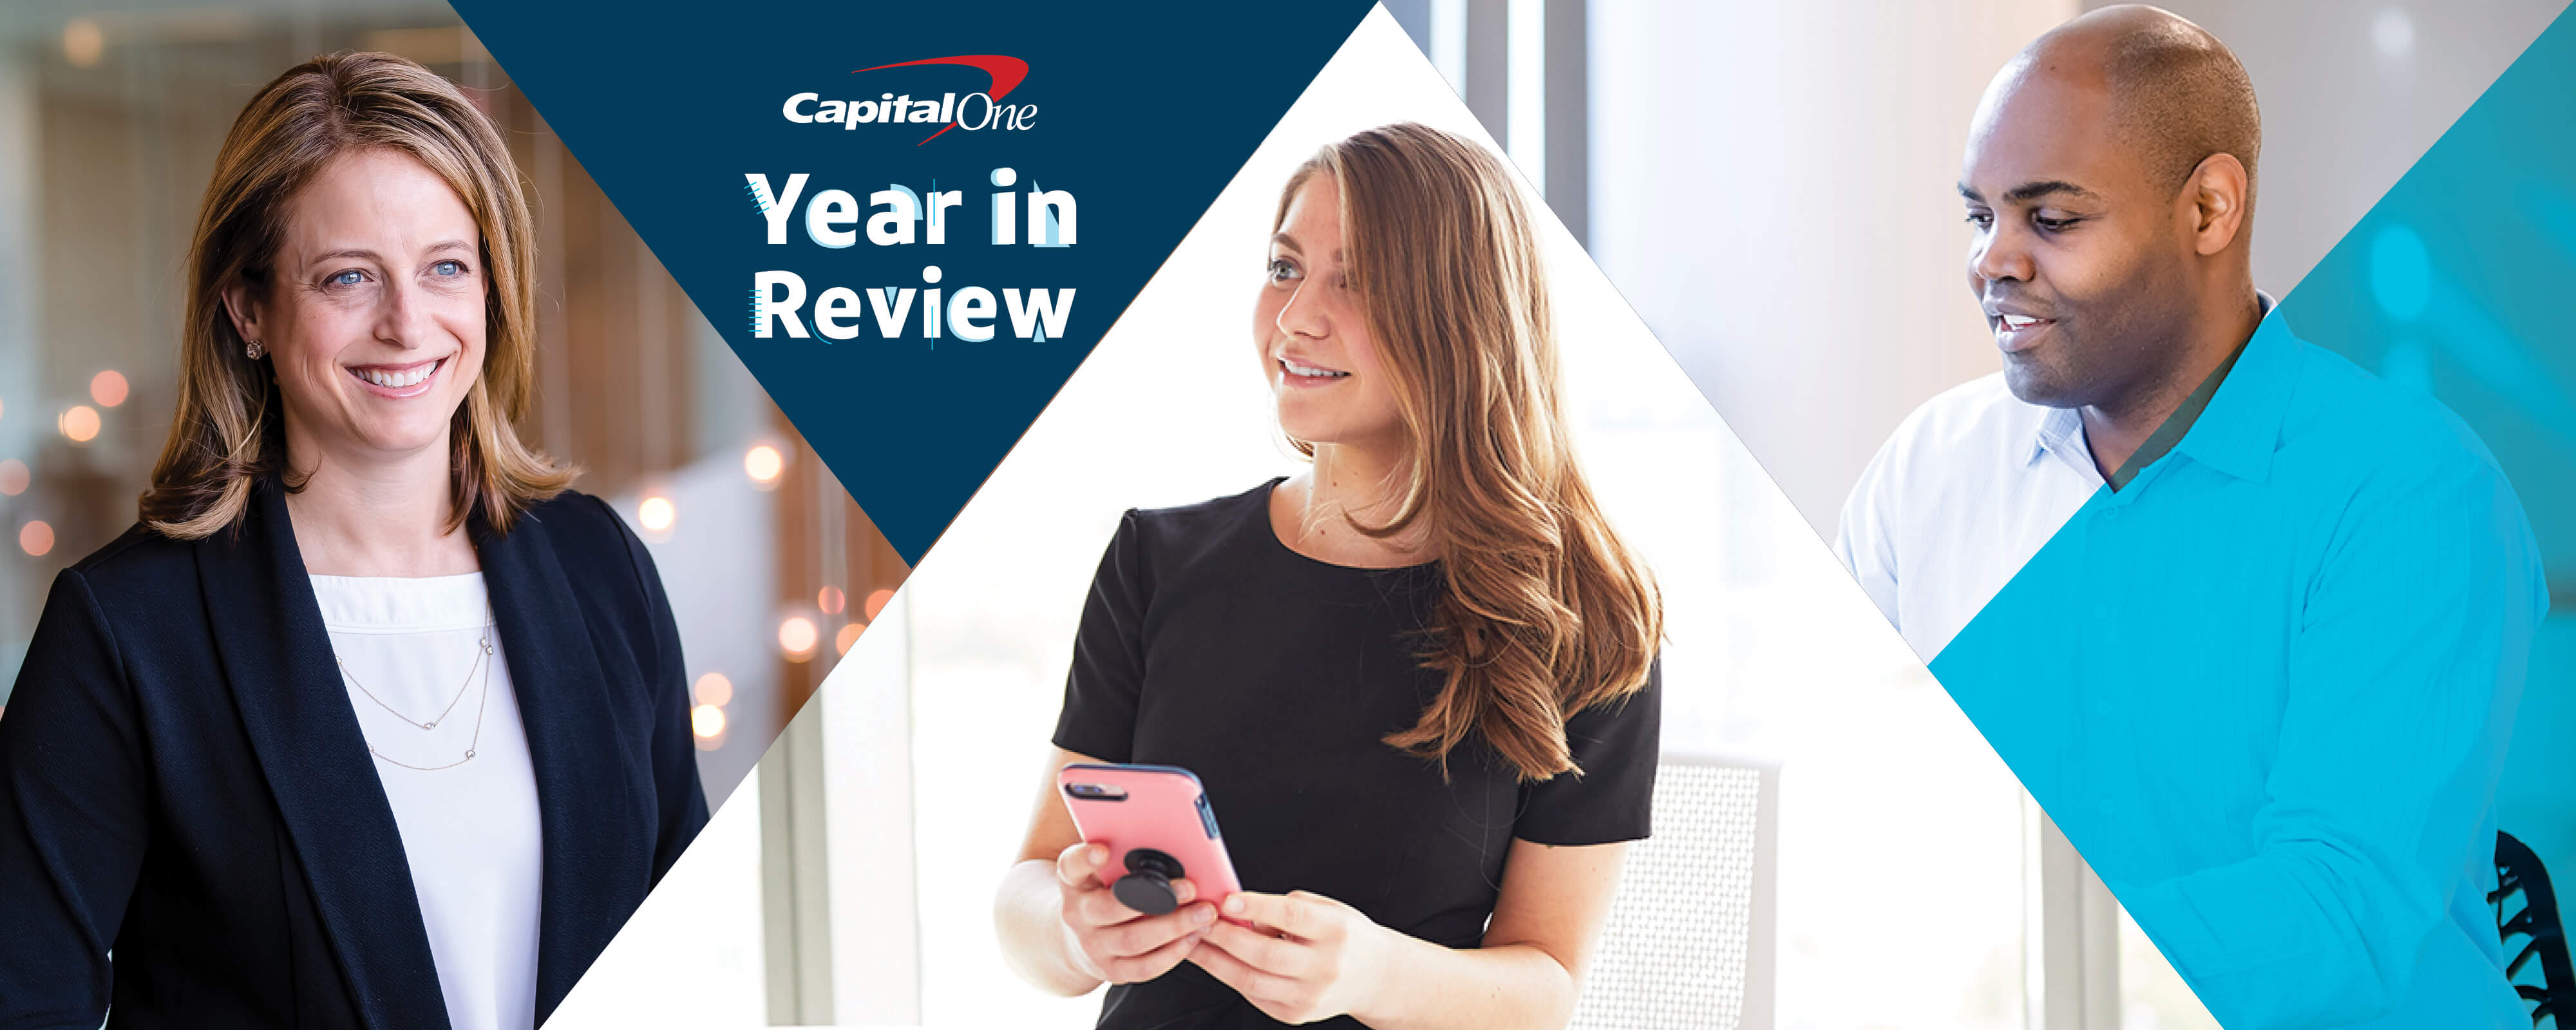 Capital One associates discuss the Careers Blog 2020 Year in Review